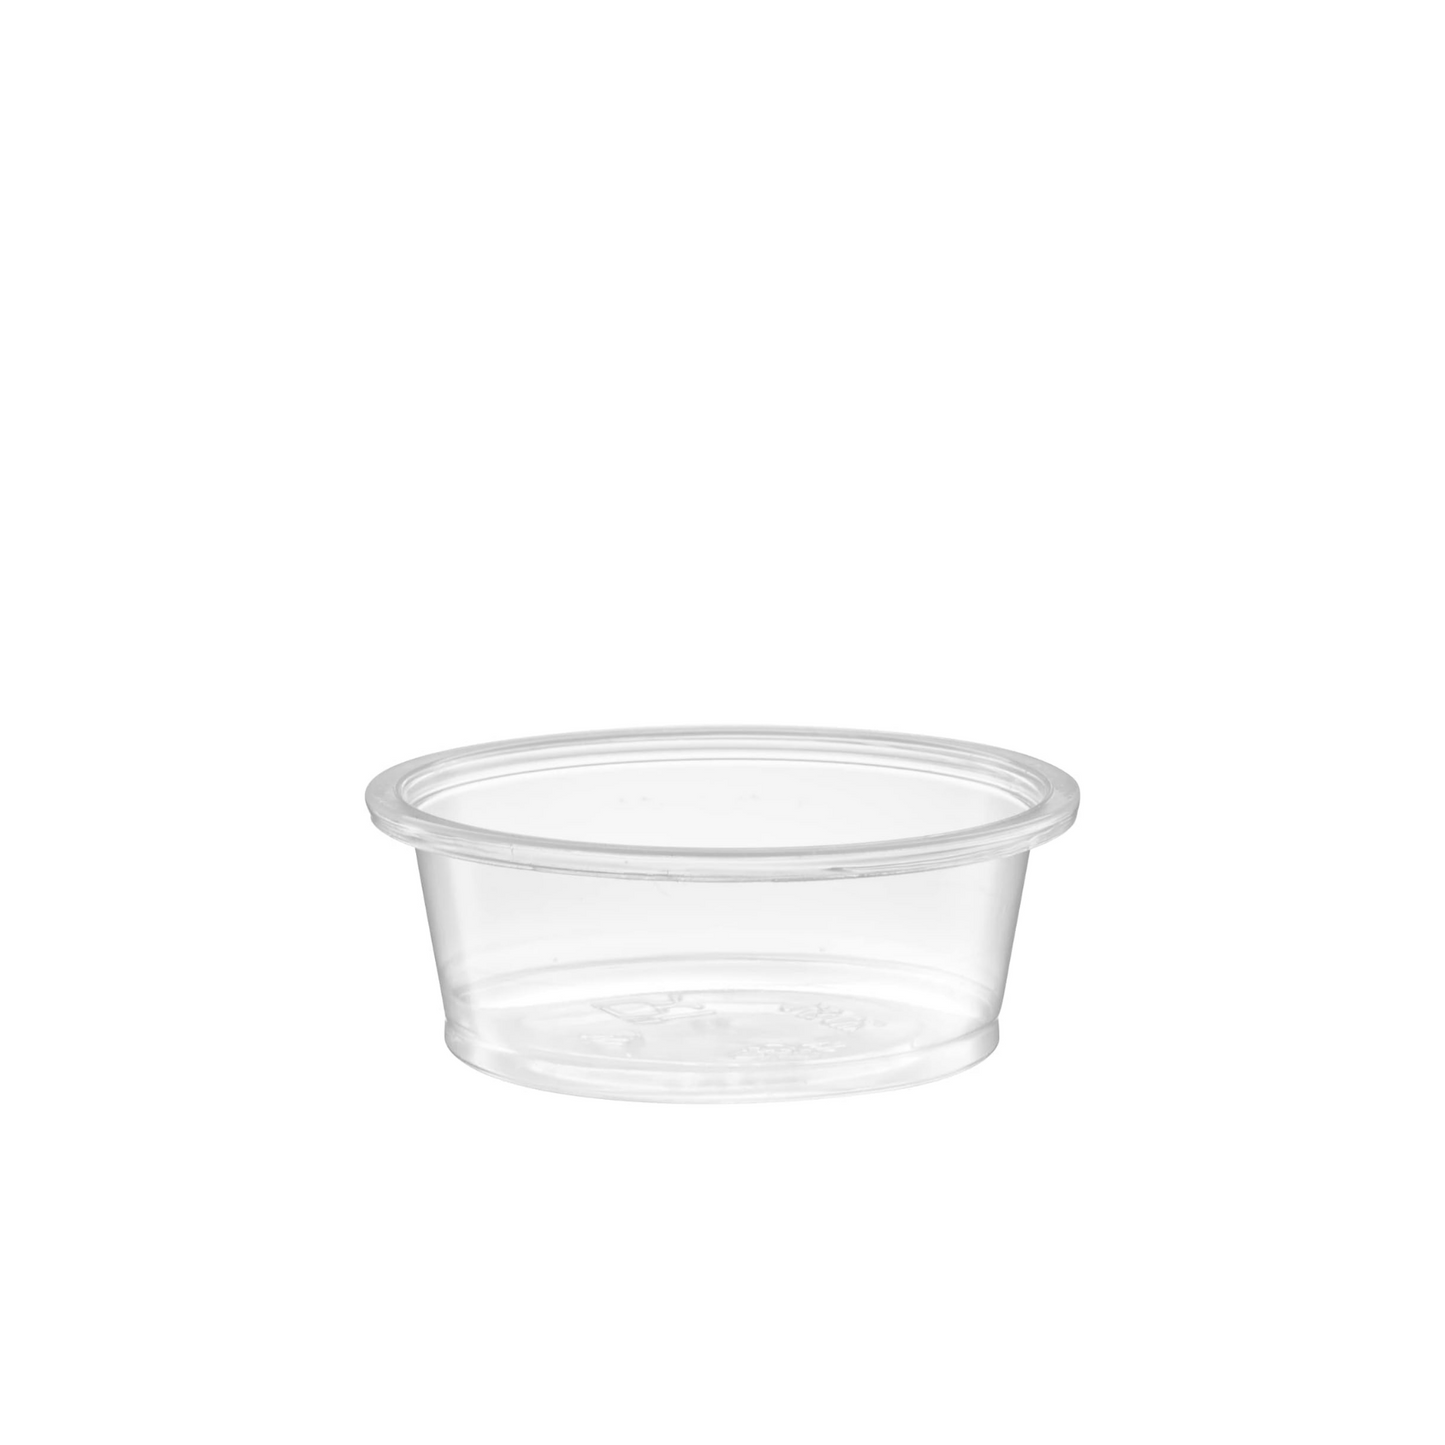 1.5 oz Portion Cups without lids